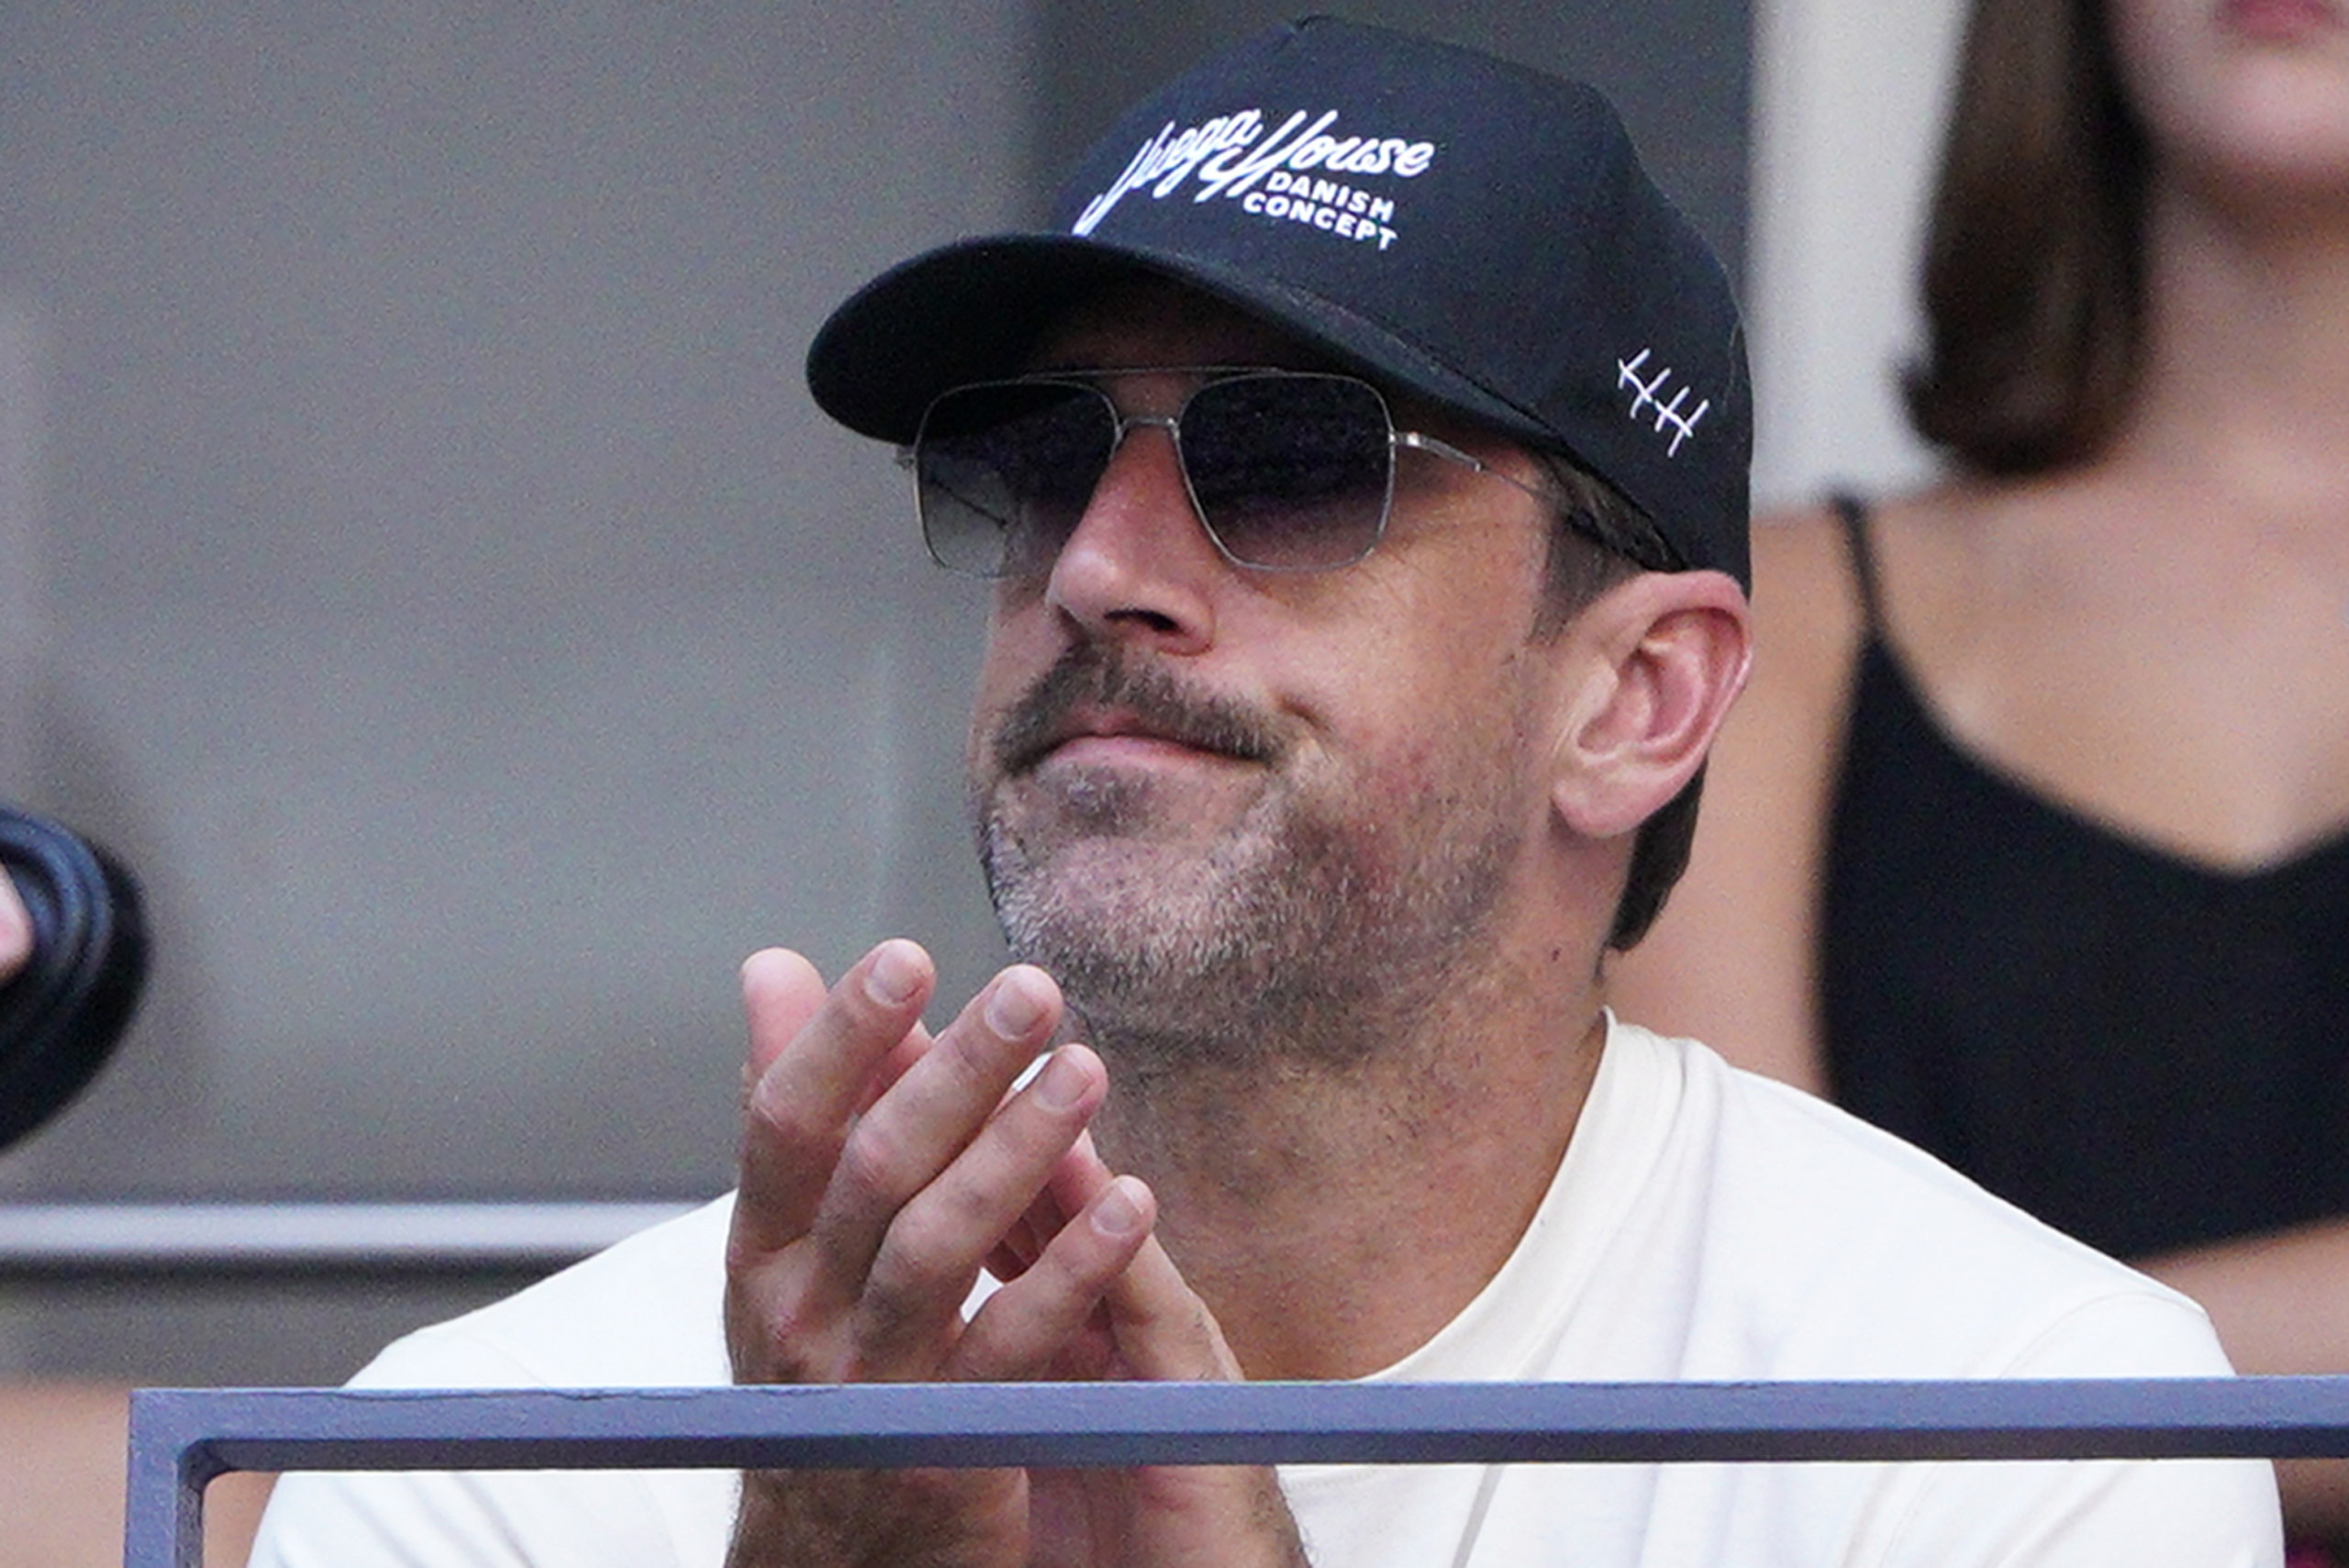 New York Jets quarterback Aaron Rodgers was spotted at the U.S. Open tennis championships Sunday in New York.